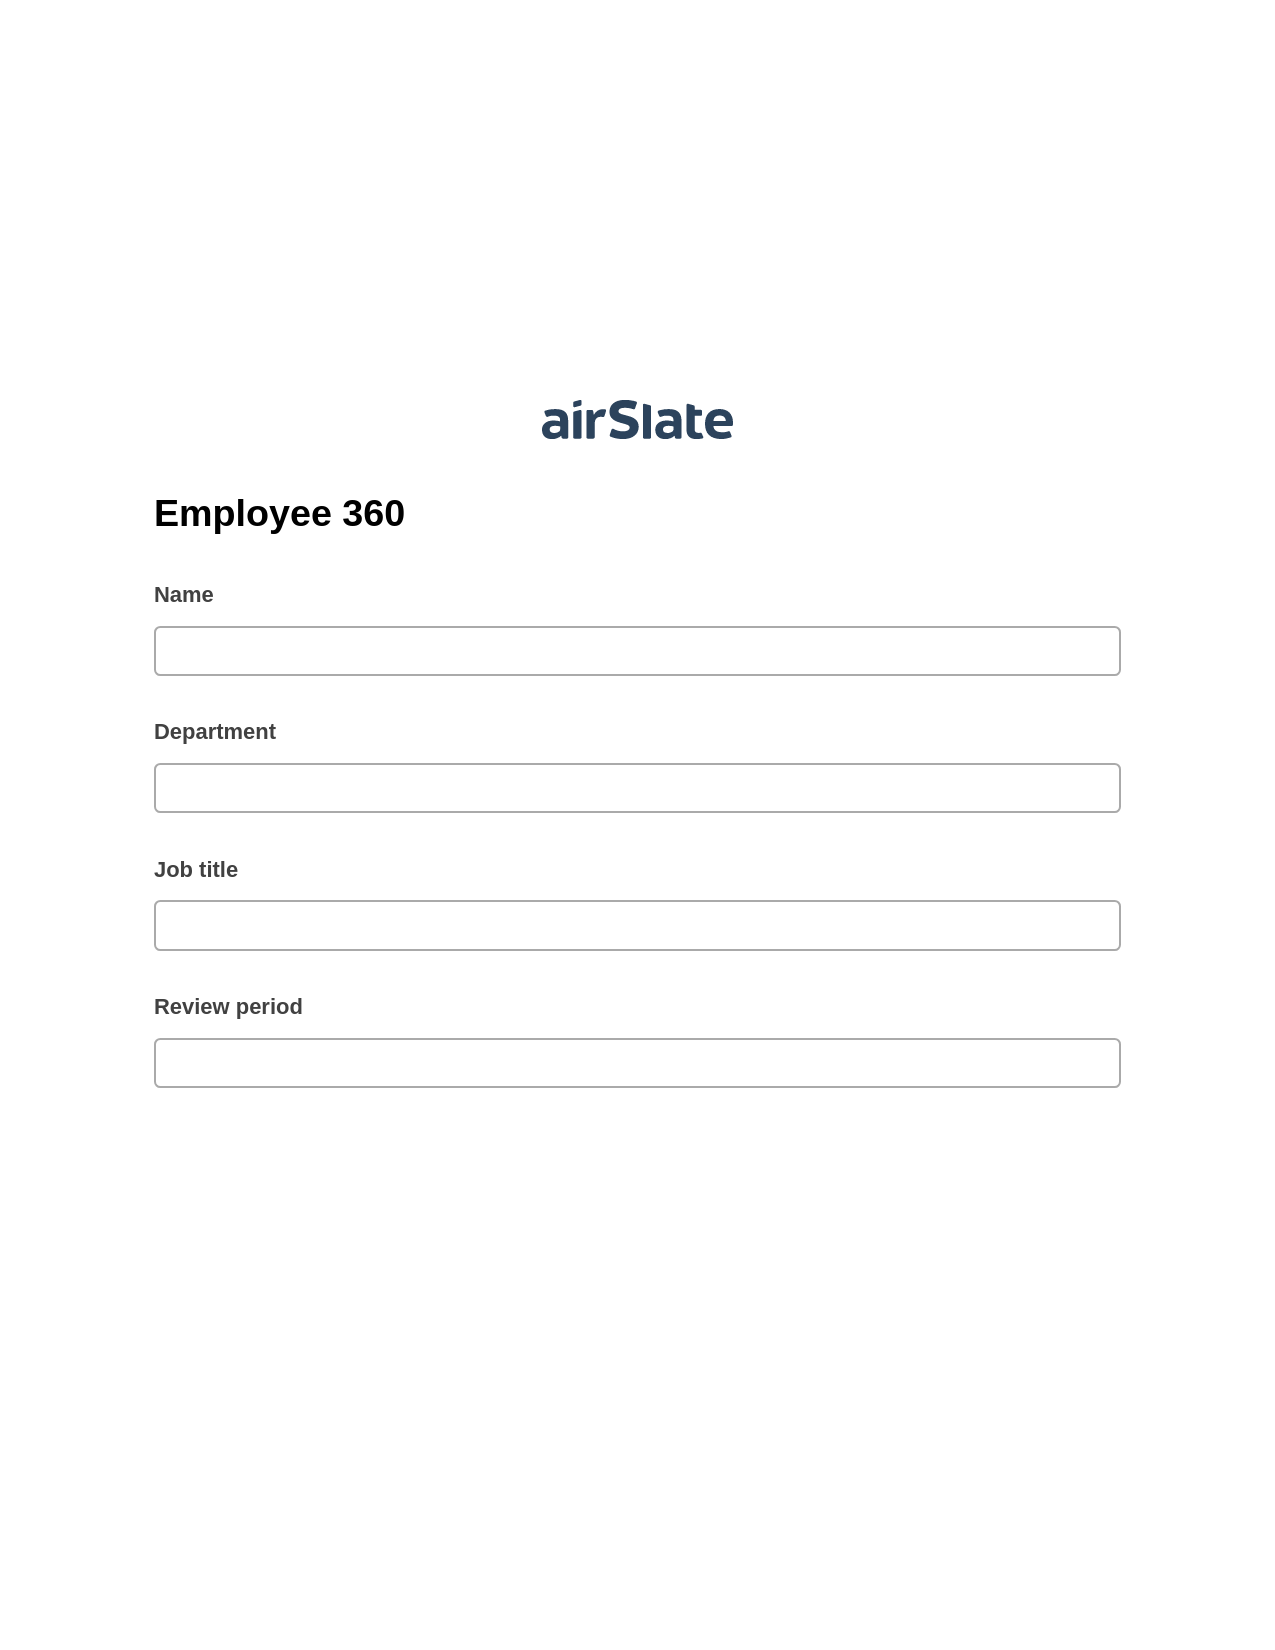 Employee 360 Pre-fill Dropdowns from Excel Bot, Update MS Dynamics 365 Record Bot, Archive to SharePoint Folder Bot